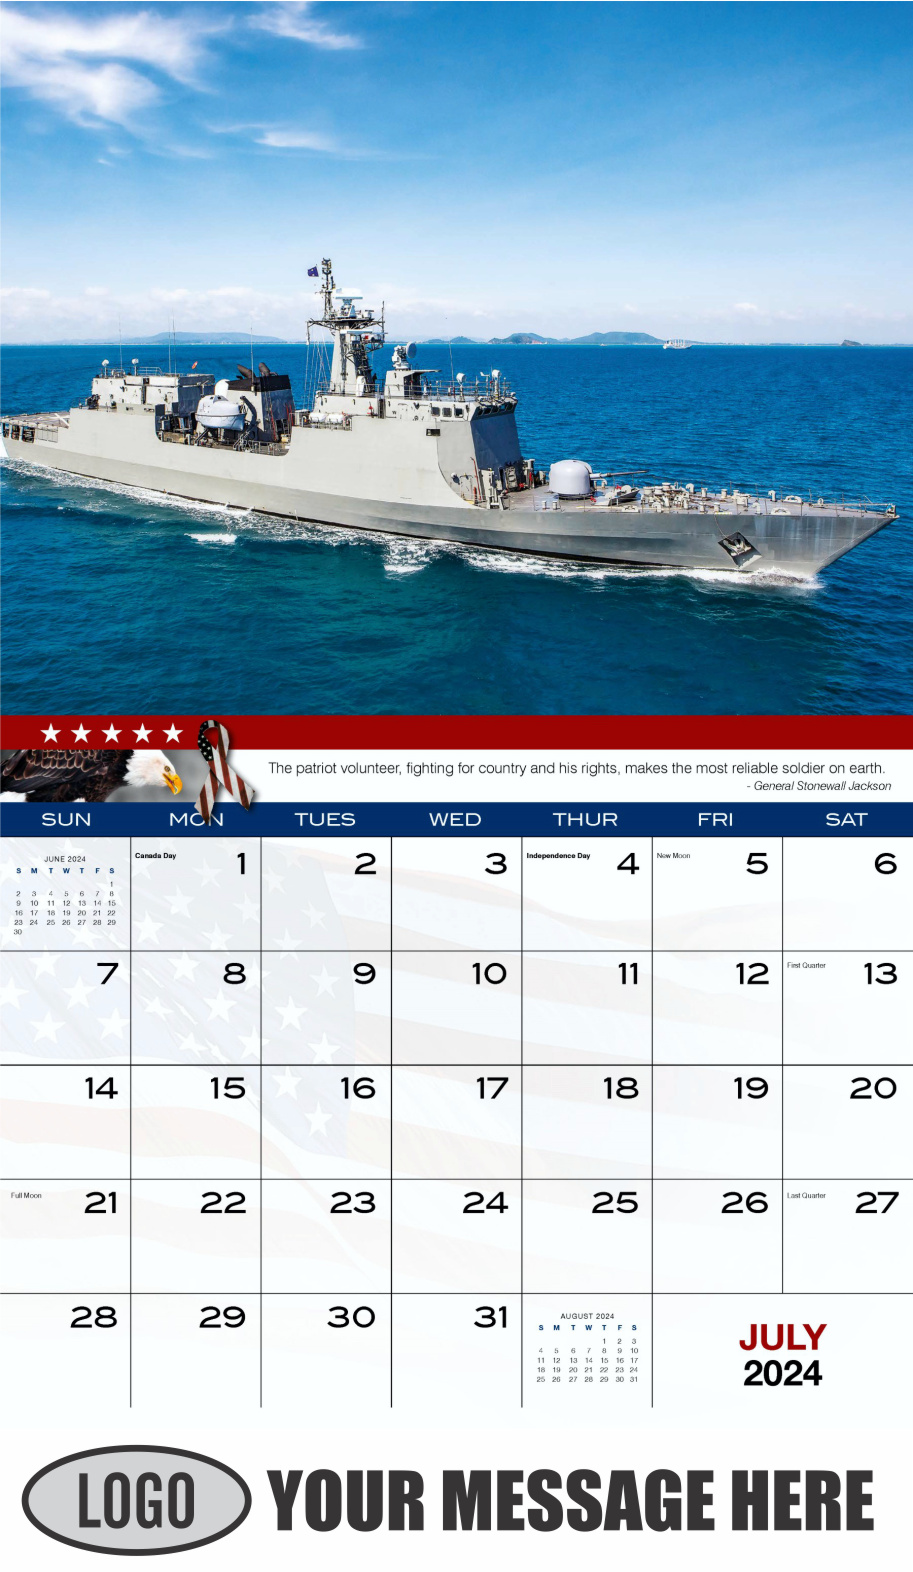 Home of the Brave 2024 USA Armed Forces Business Promo Calendar - July